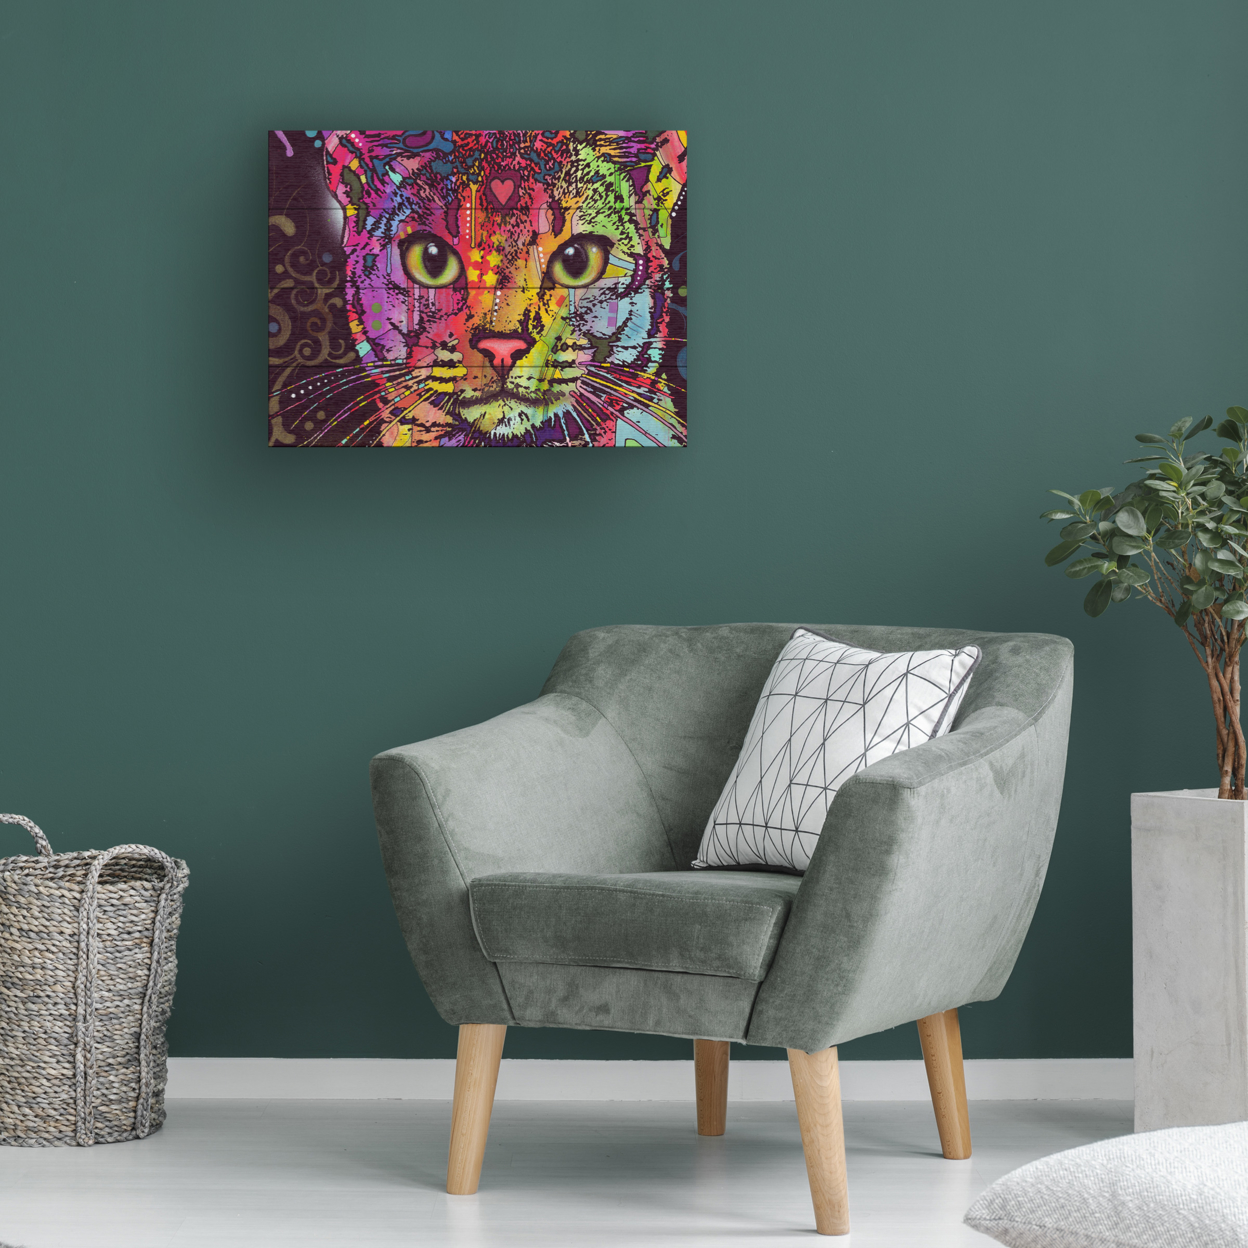 Wall Art 12 X 16 Inches Titled Abyssinian Ready To Hang Printed On Wooden Planks